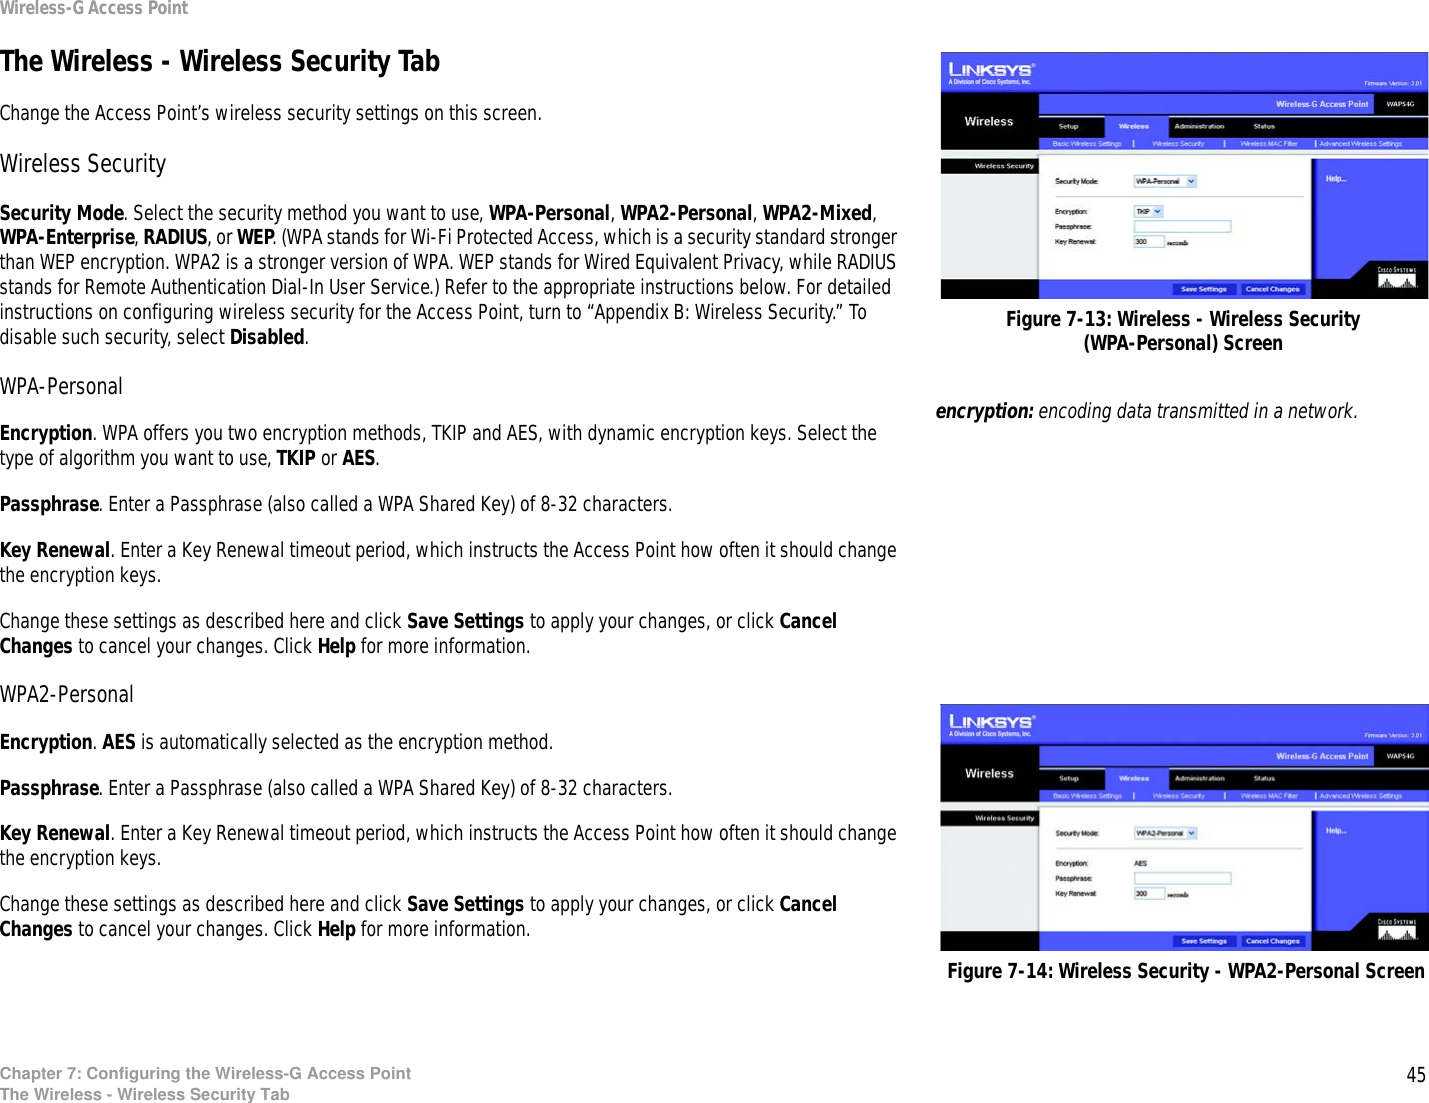 45Chapter 7: Configuring the Wireless-G Access PointThe Wireless - Wireless Security TabWireless-G Access PointThe Wireless - Wireless Security TabChange the Access Point’s wireless security settings on this screen.Wireless SecuritySecurity Mode. Select the security method you want to use, WPA-Personal, WPA2-Personal, WPA2-Mixed, WPA-Enterprise, RADIUS, or WEP. (WPA stands for Wi-Fi Protected Access, which is a security standard stronger than WEP encryption. WPA2 is a stronger version of WPA. WEP stands for Wired Equivalent Privacy, while RADIUS stands for Remote Authentication Dial-In User Service.) Refer to the appropriate instructions below. For detailed instructions on configuring wireless security for the Access Point, turn to “Appendix B: Wireless Security.” To disable such security, select Disabled.WPA-PersonalEncryption. WPA offers you two encryption methods, TKIP and AES, with dynamic encryption keys. Select the type of algorithm you want to use, TKIP or AES.Passphrase. Enter a Passphrase (also called a WPA Shared Key) of 8-32 characters. Key Renewal. Enter a Key Renewal timeout period, which instructs the Access Point how often it should change the encryption keys.Change these settings as described here and click Save Settings to apply your changes, or click Cancel Changes to cancel your changes. Click Help for more information.WPA2-PersonalEncryption. AES is automatically selected as the encryption method.Passphrase. Enter a Passphrase (also called a WPA Shared Key) of 8-32 characters. Key Renewal. Enter a Key Renewal timeout period, which instructs the Access Point how often it should change the encryption keys.Change these settings as described here and click Save Settings to apply your changes, or click Cancel Changes to cancel your changes. Click Help for more information.encryption: encoding data transmitted in a network.Figure 7-13: Wireless - Wireless Security (WPA-Personal) ScreenFigure 7-14: Wireless Security - WPA2-Personal Screen